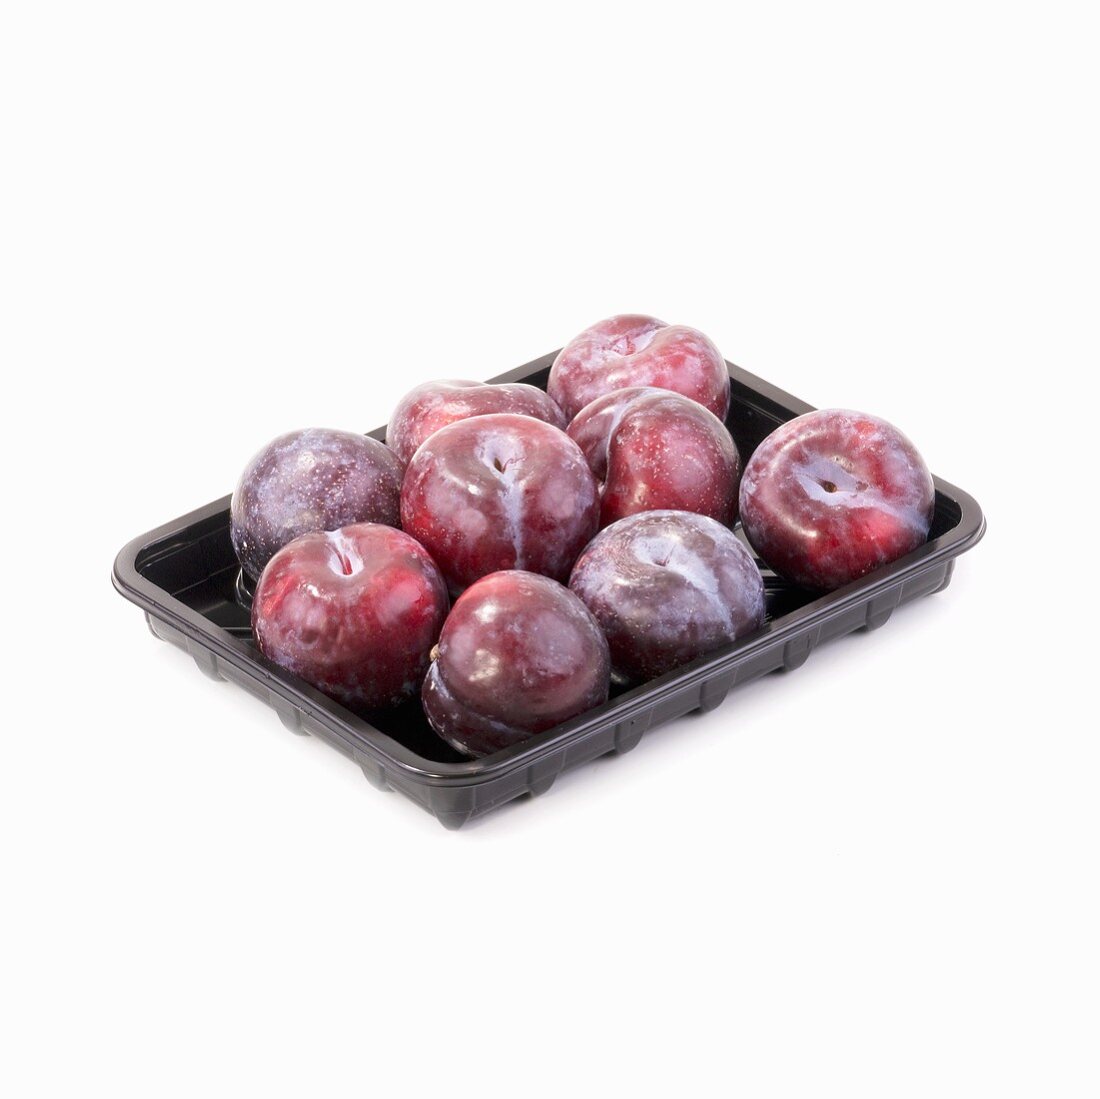 Plums in a plastic tray